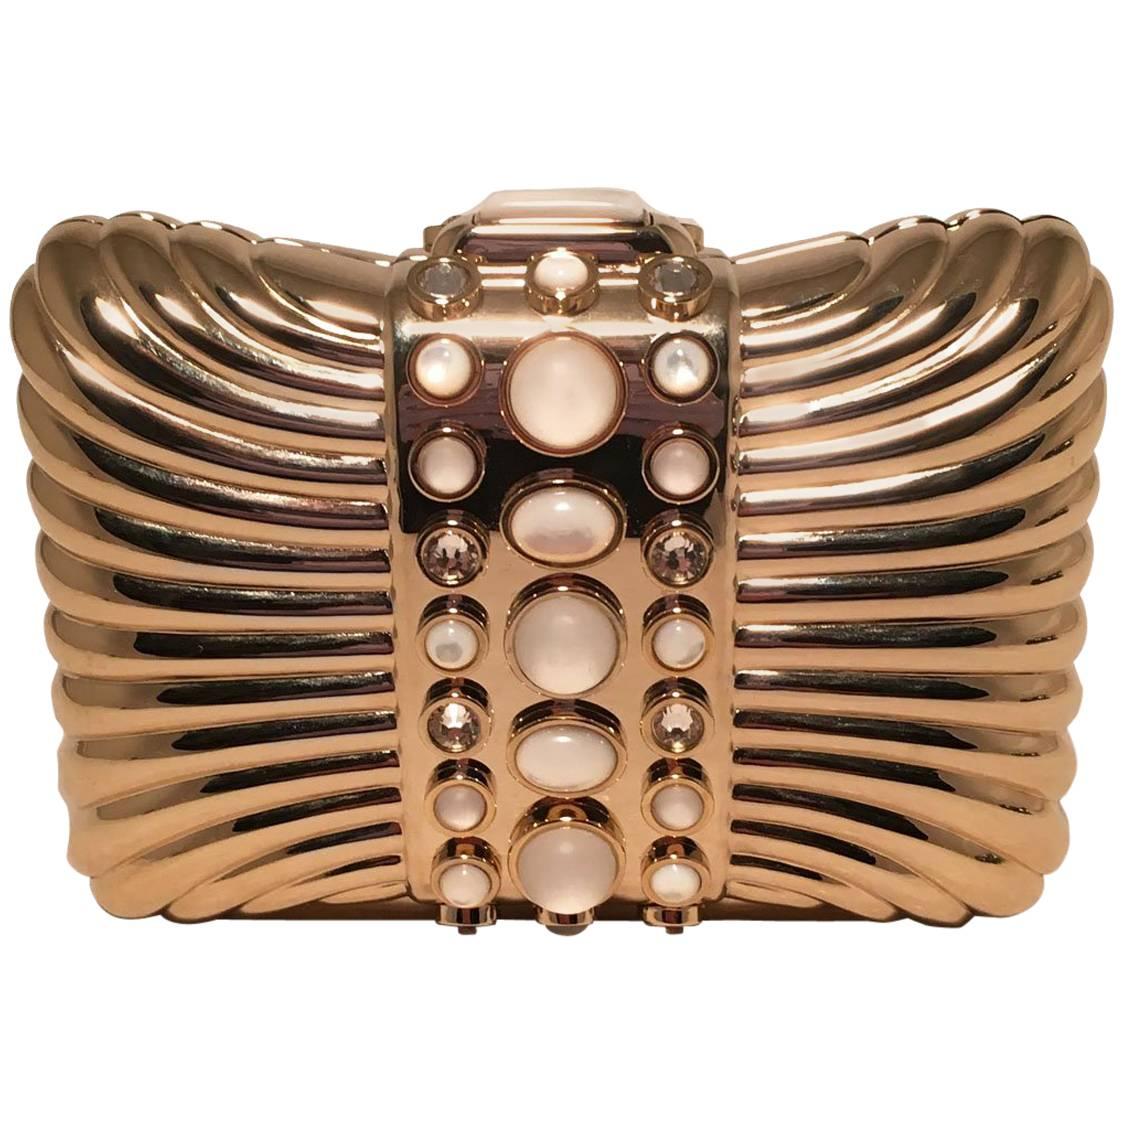 Judith Leiber Vintage Gold Box Clutch with Pearl Details